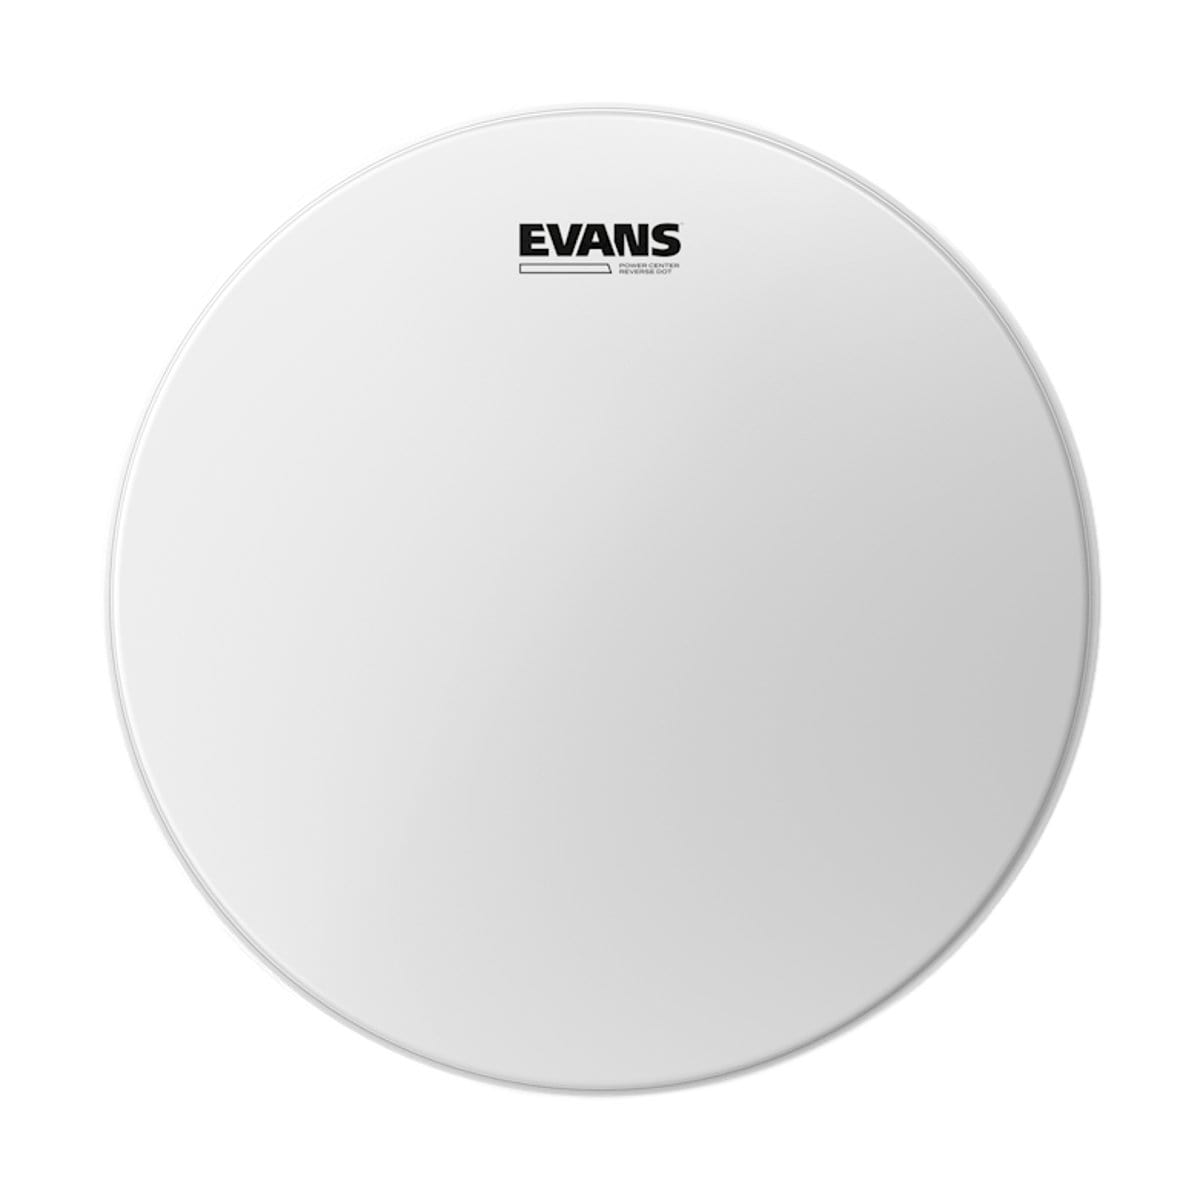 Evans Percussion Evans 14 Inch Snare Drum Head Power Centre Reverse Dot Coated B14G1RD - Byron Music